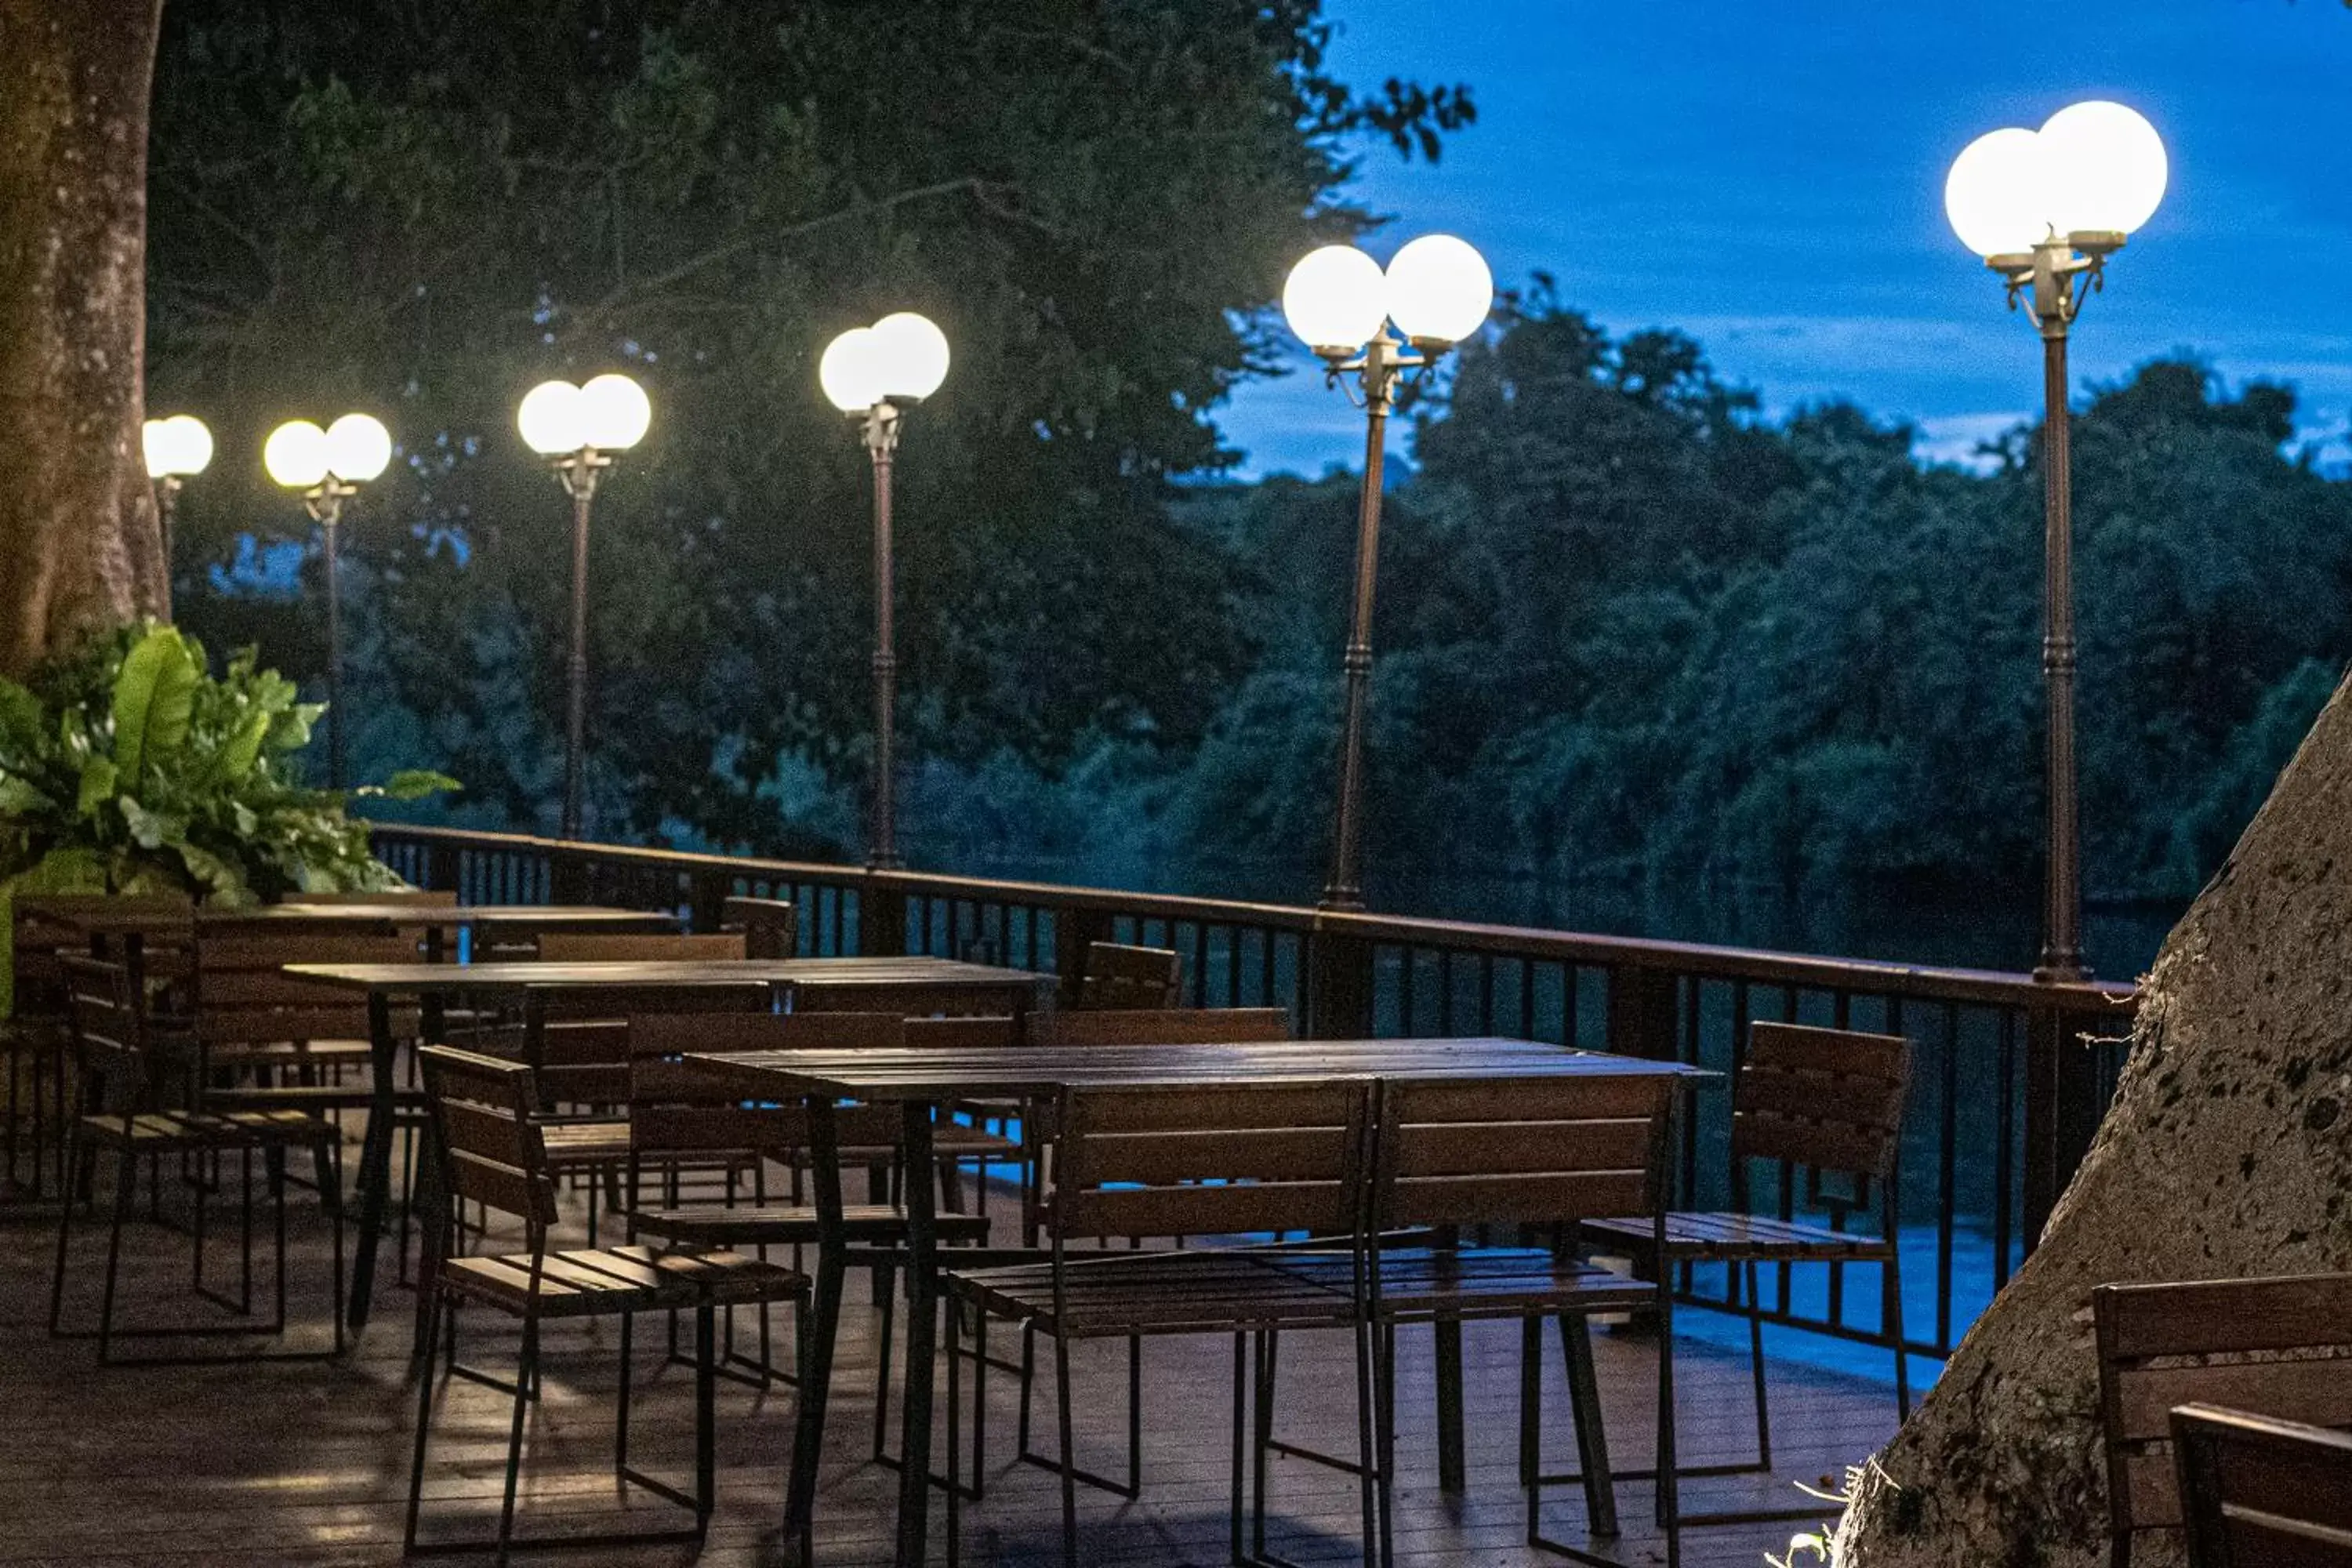 Dinner in The Legacy River Kwai Resort